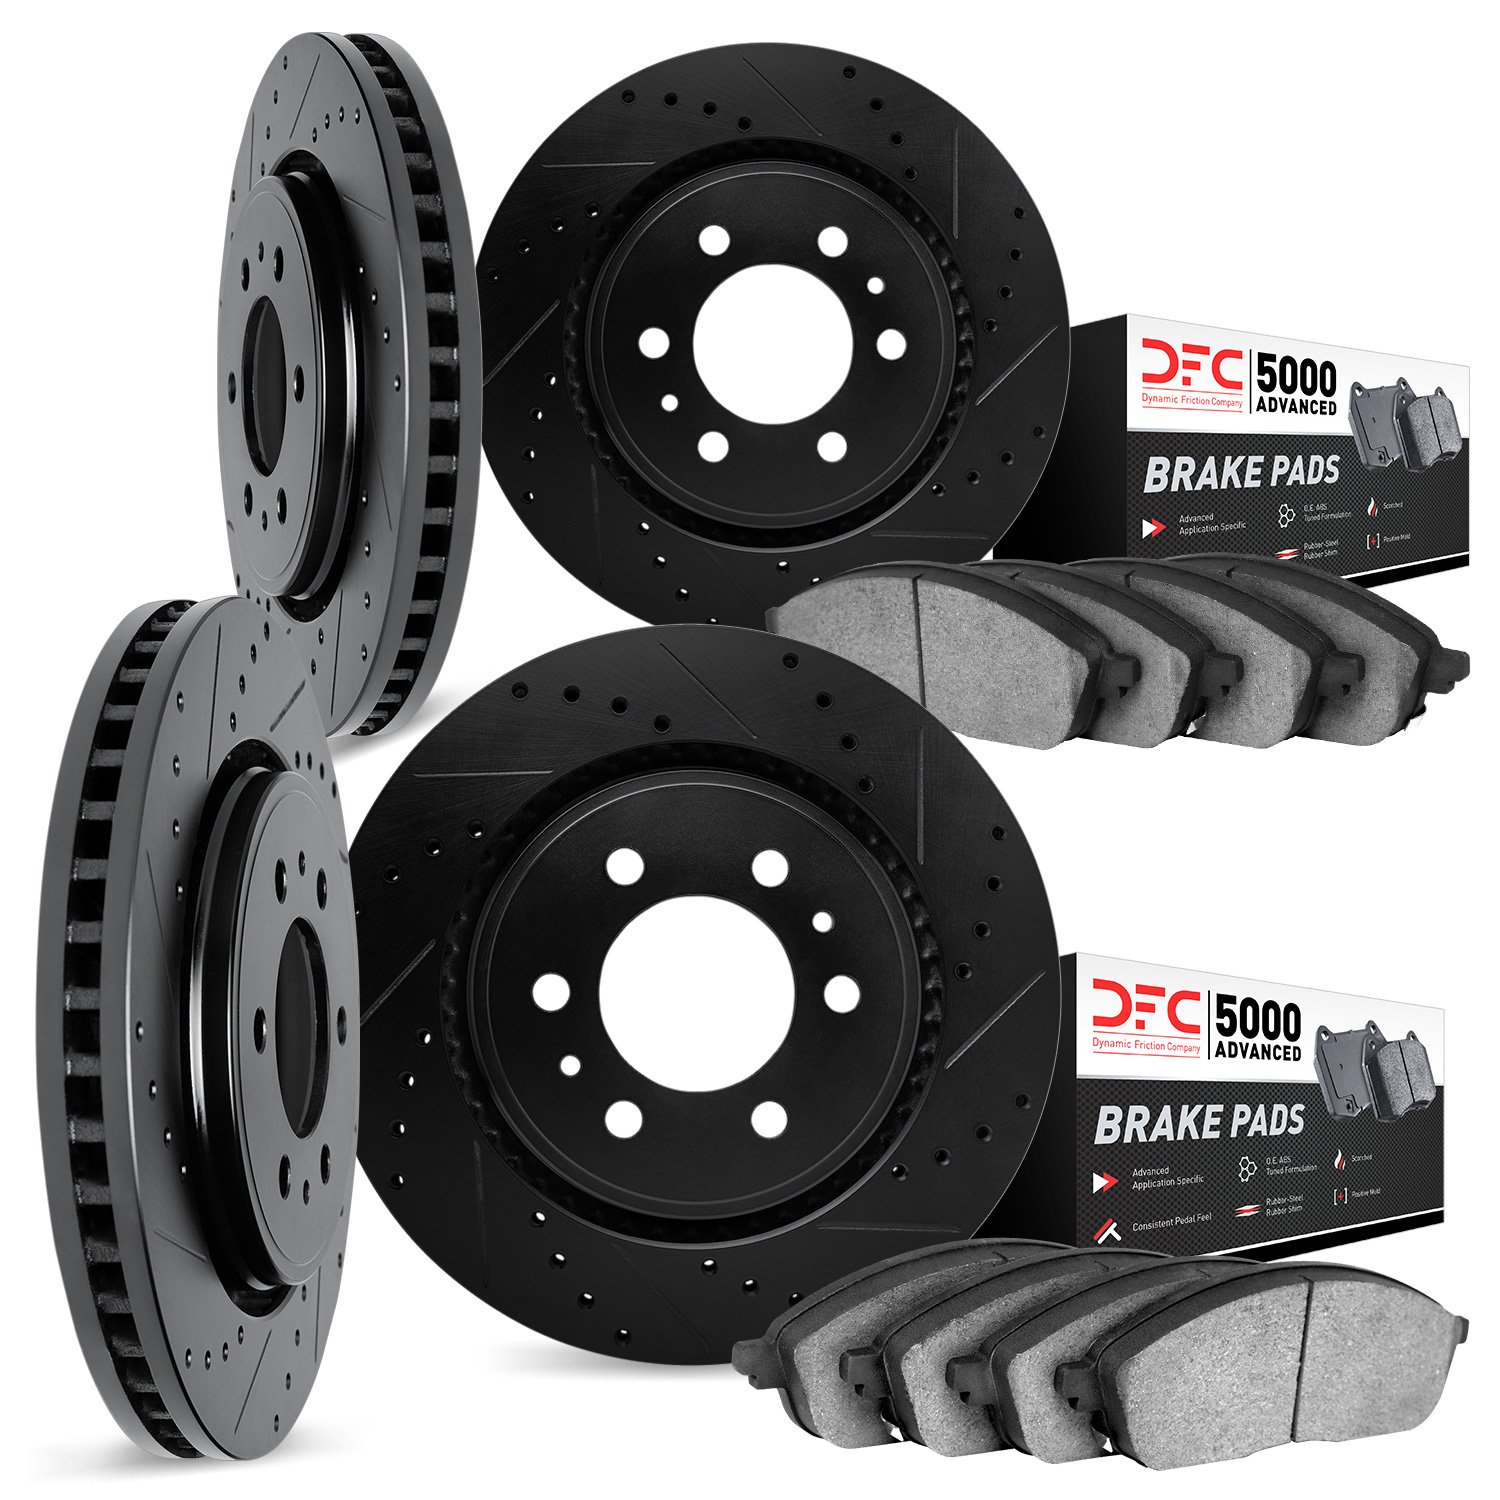 8504-47262 Drilled/Slotted Brake Rotors w/5000 Advanced Brake Pads Kit [Black], Fits Select GM, Position: Front and Rear